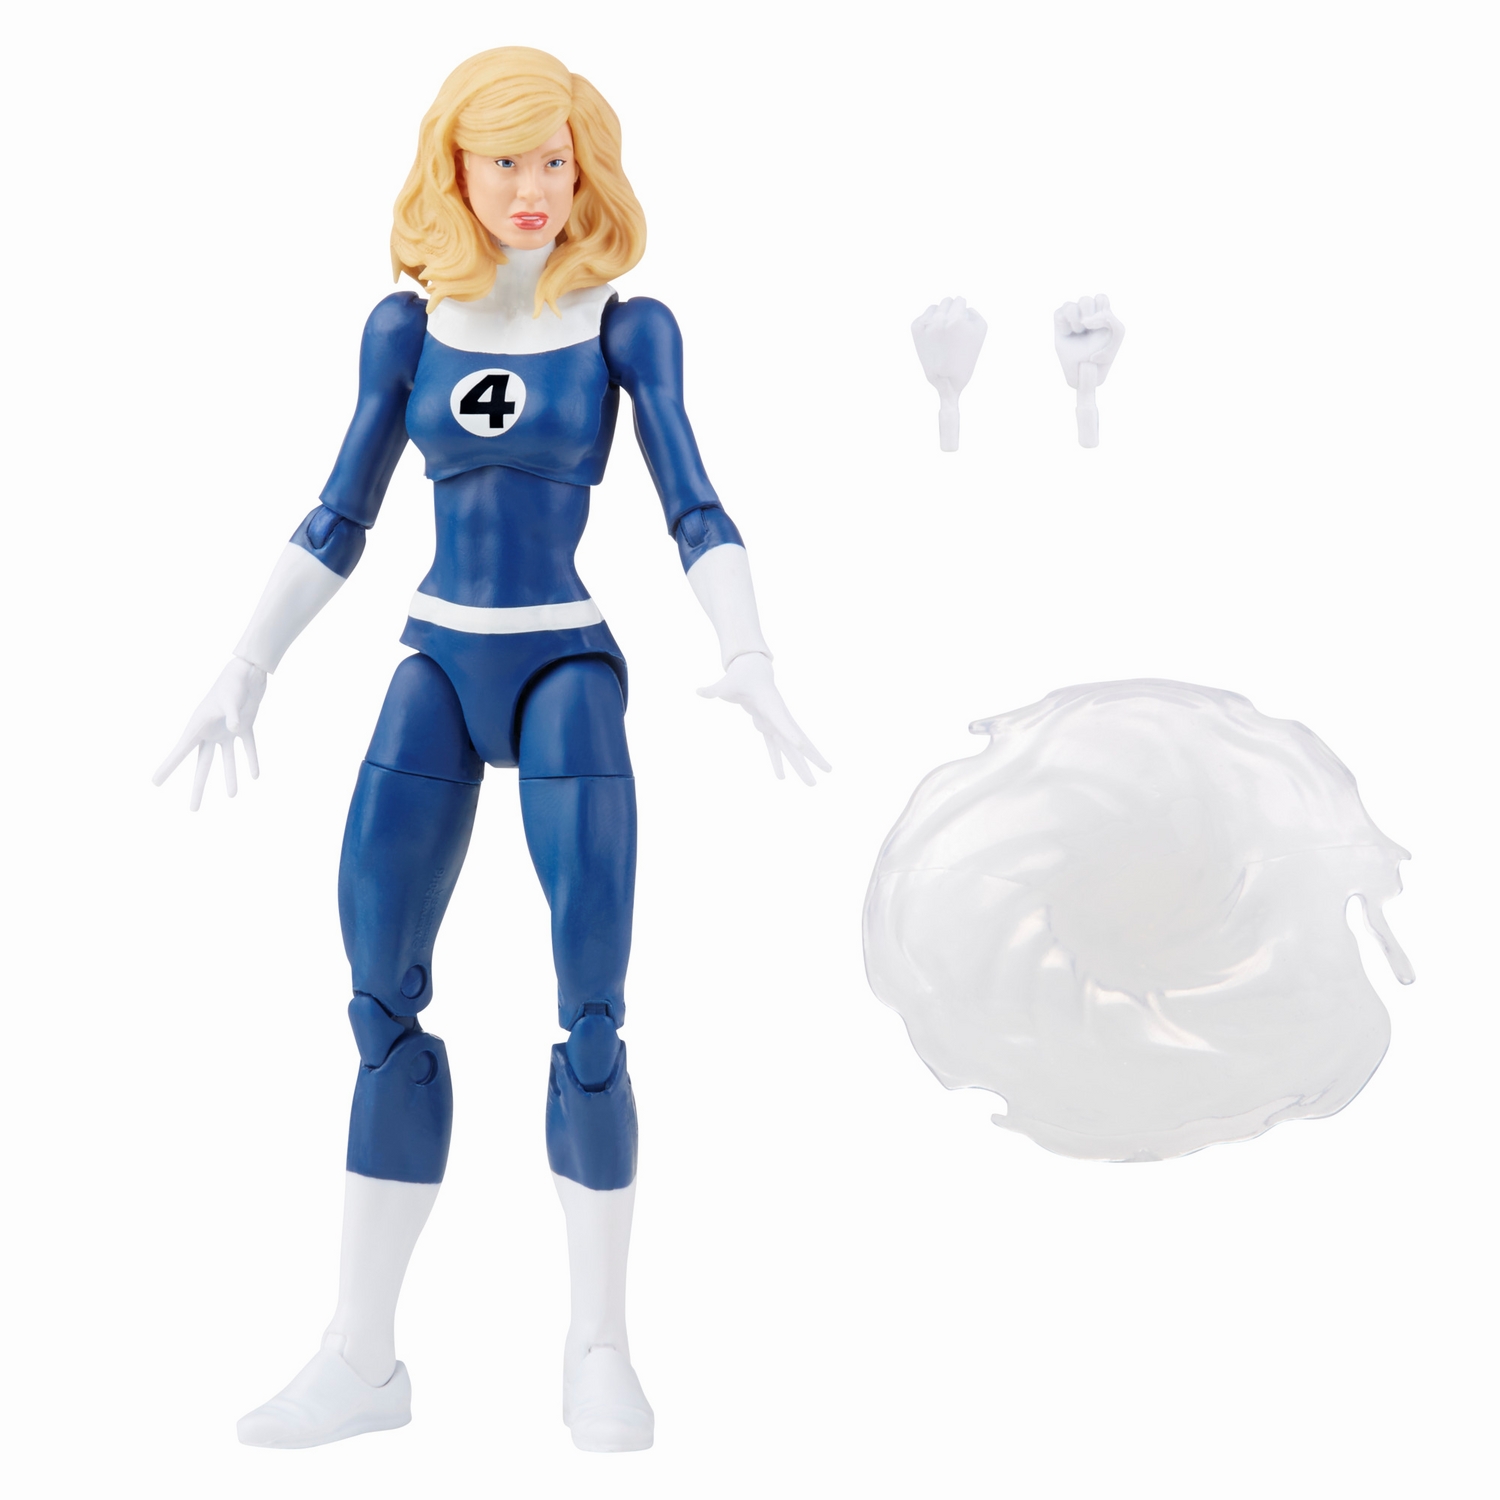 MARVEL LEGENDS SERIES 6-INCH RETRO FANTASTIC FOUR MARVEL'S INVISIBLE WOMAN Figure_oop 1.jpg